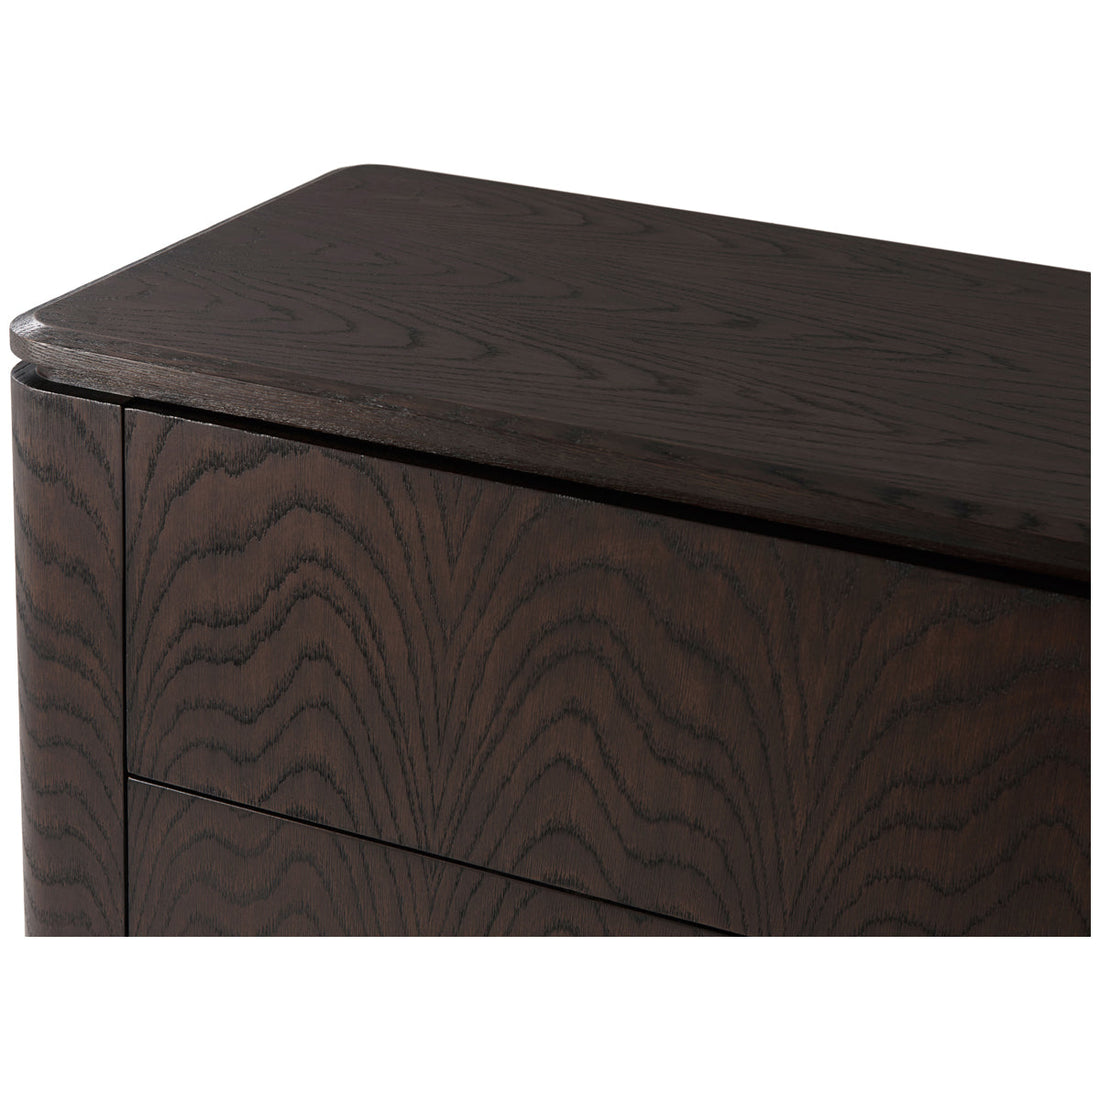 Theodore Alexander Admire Chest of Drawers